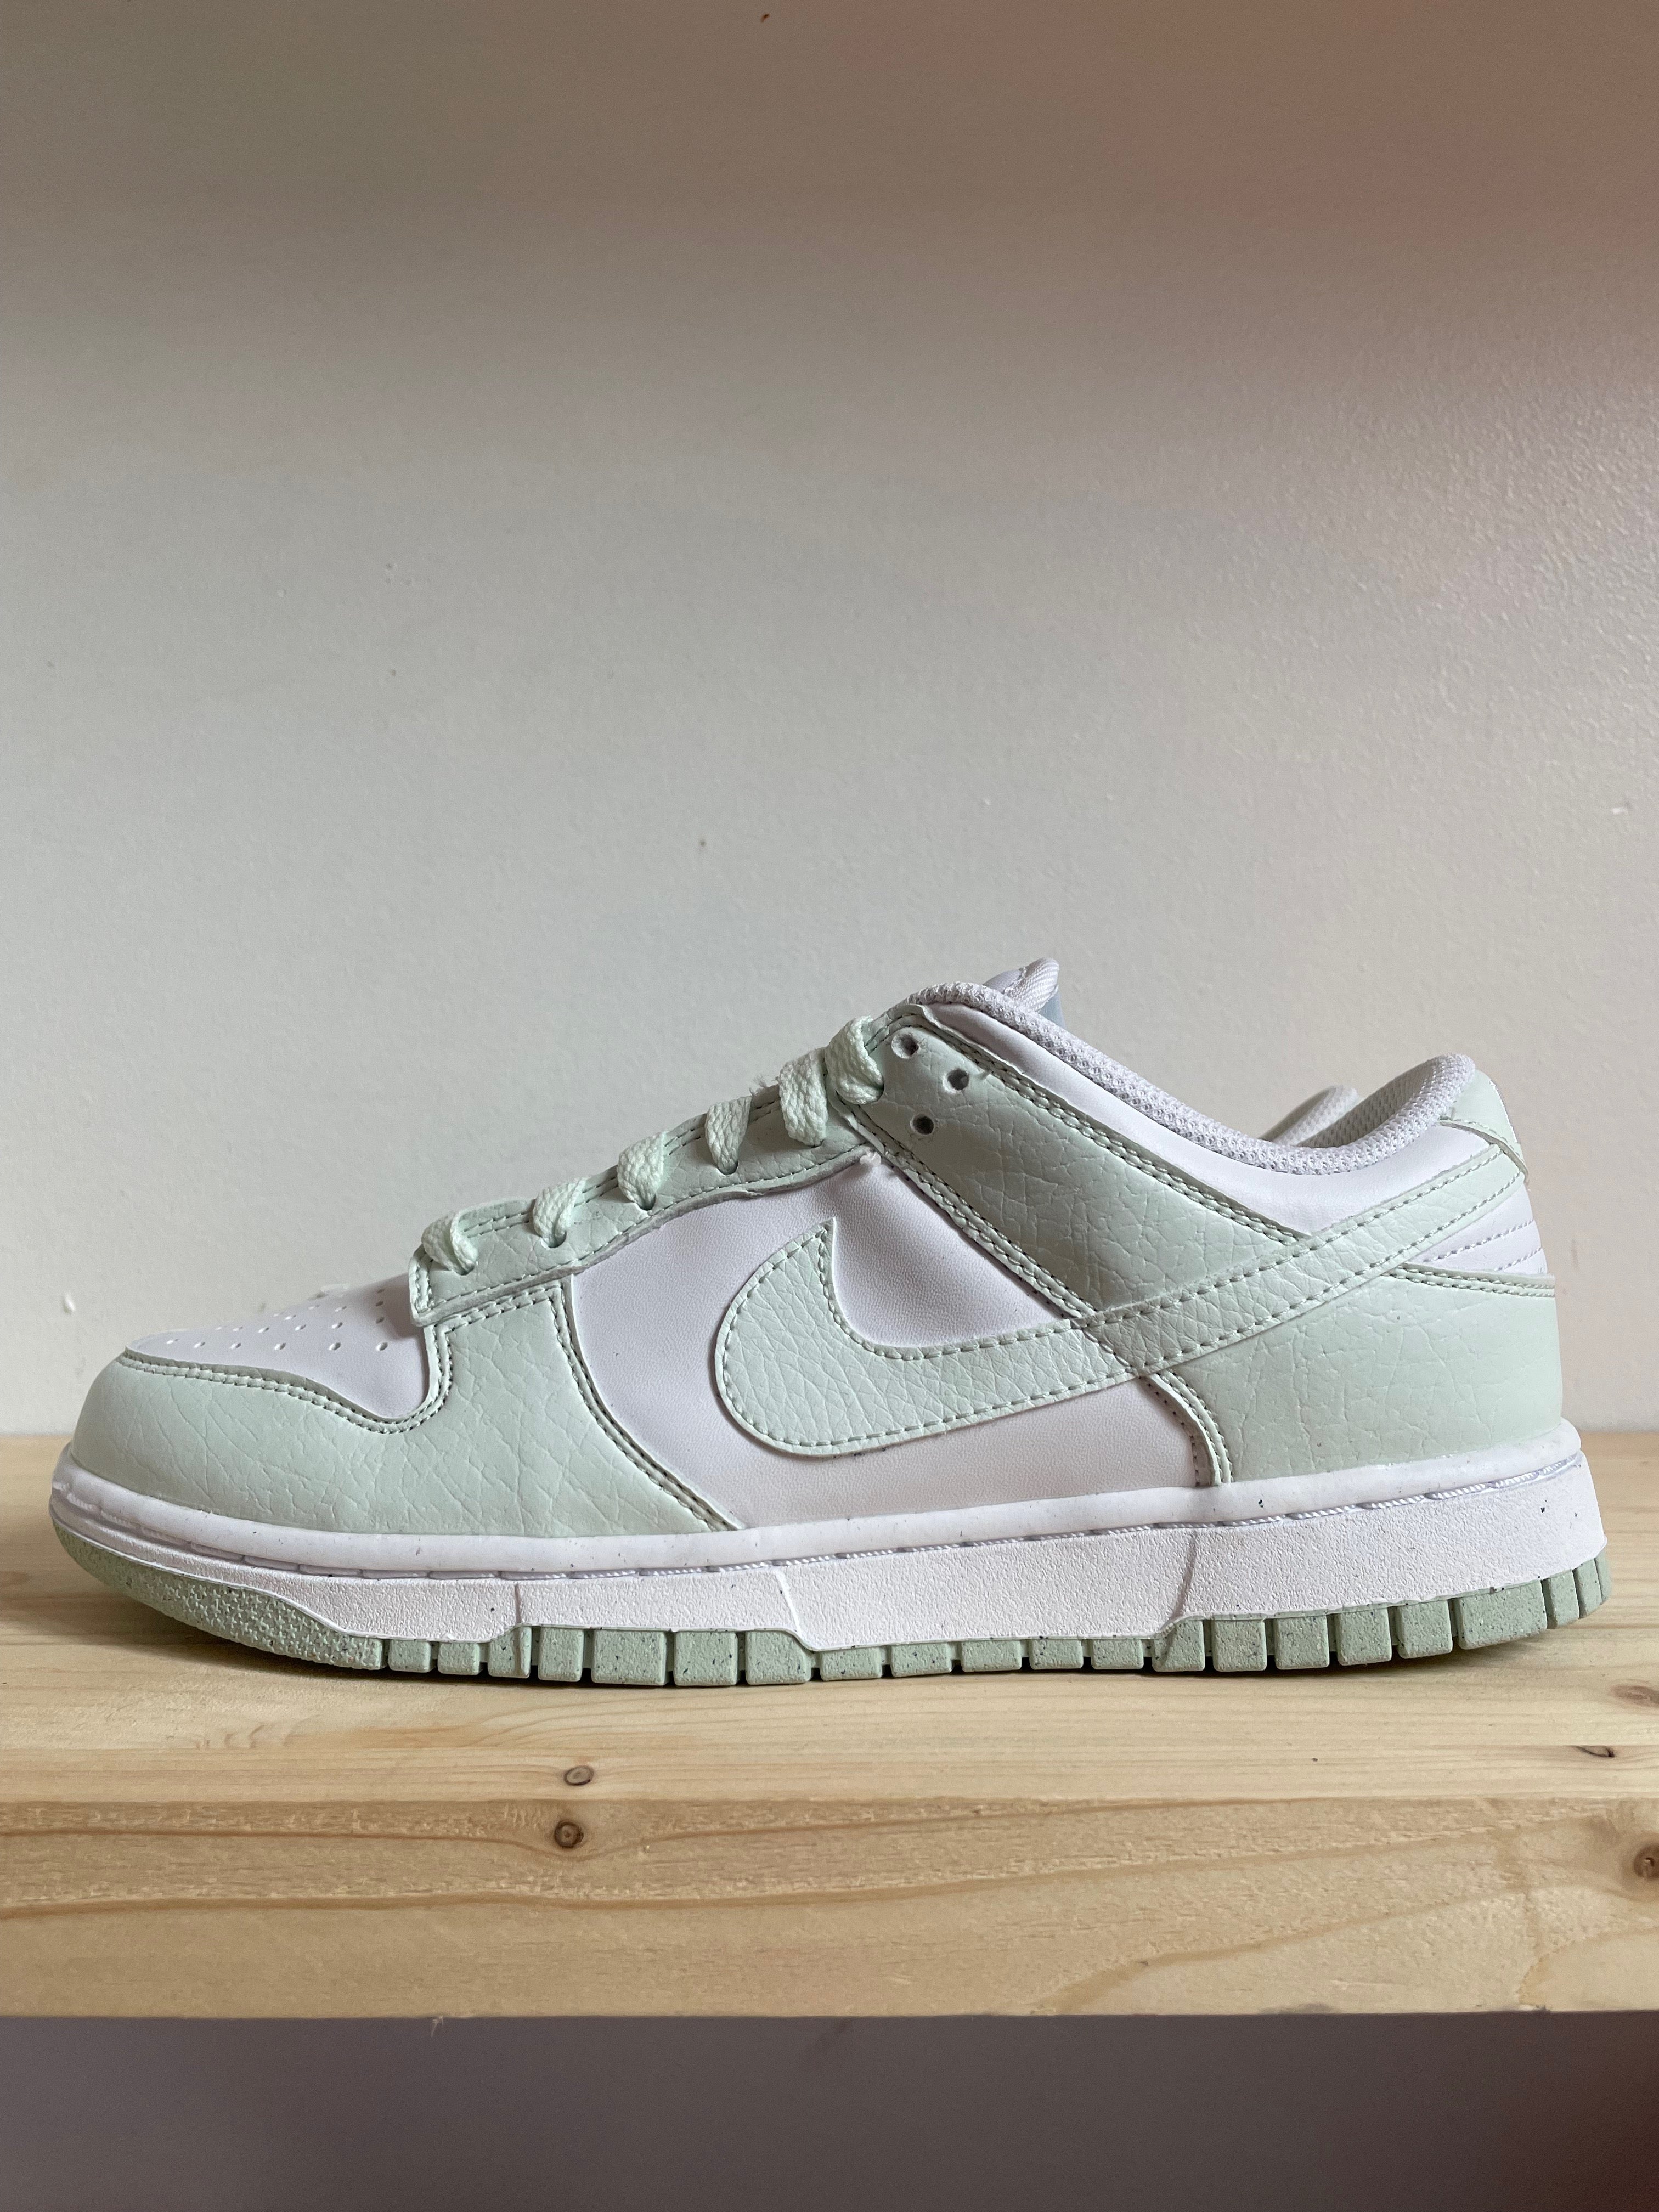 Nike Dunk Low Next Nature White Mint (W) – Antwerp snkr